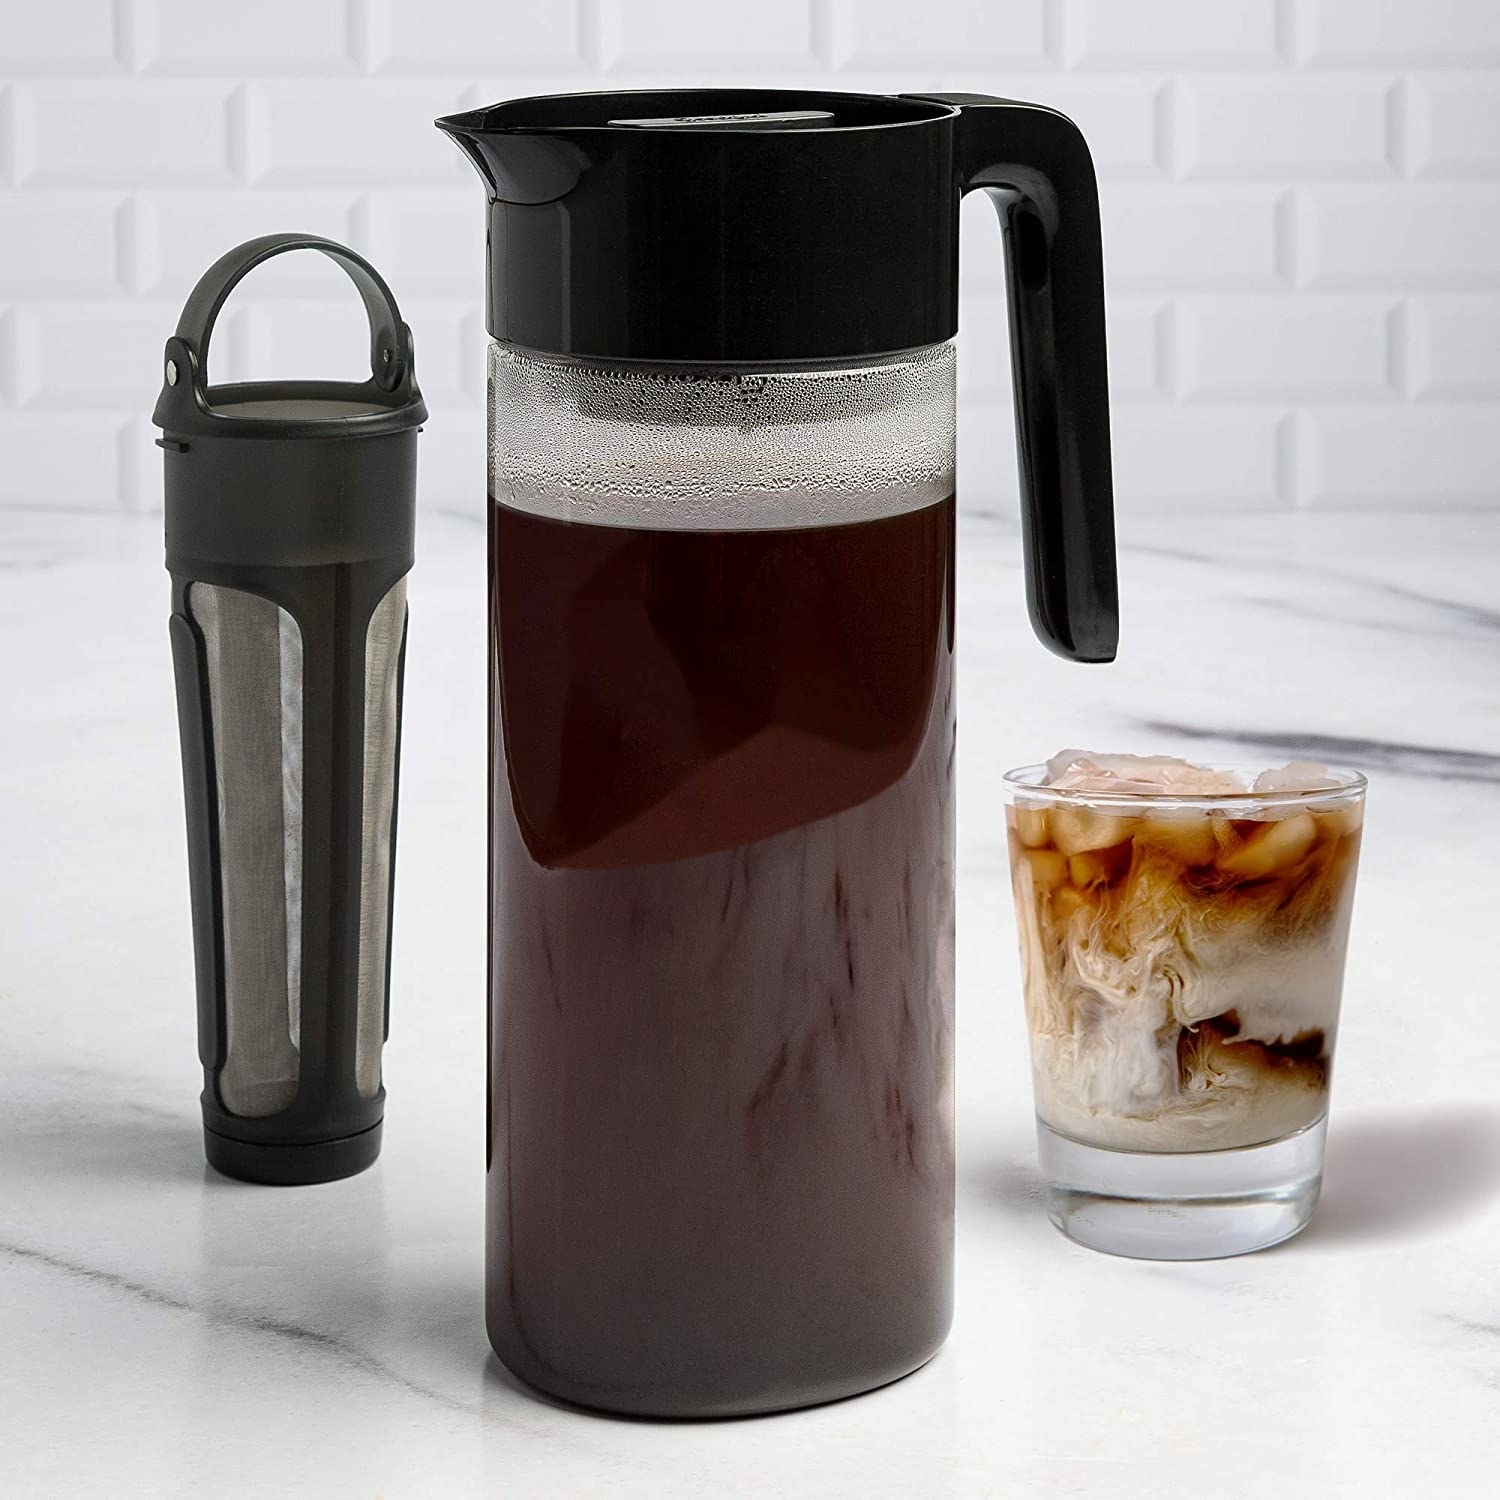 the cold brew coffee maker next to the infuser and a glass of iced coffee